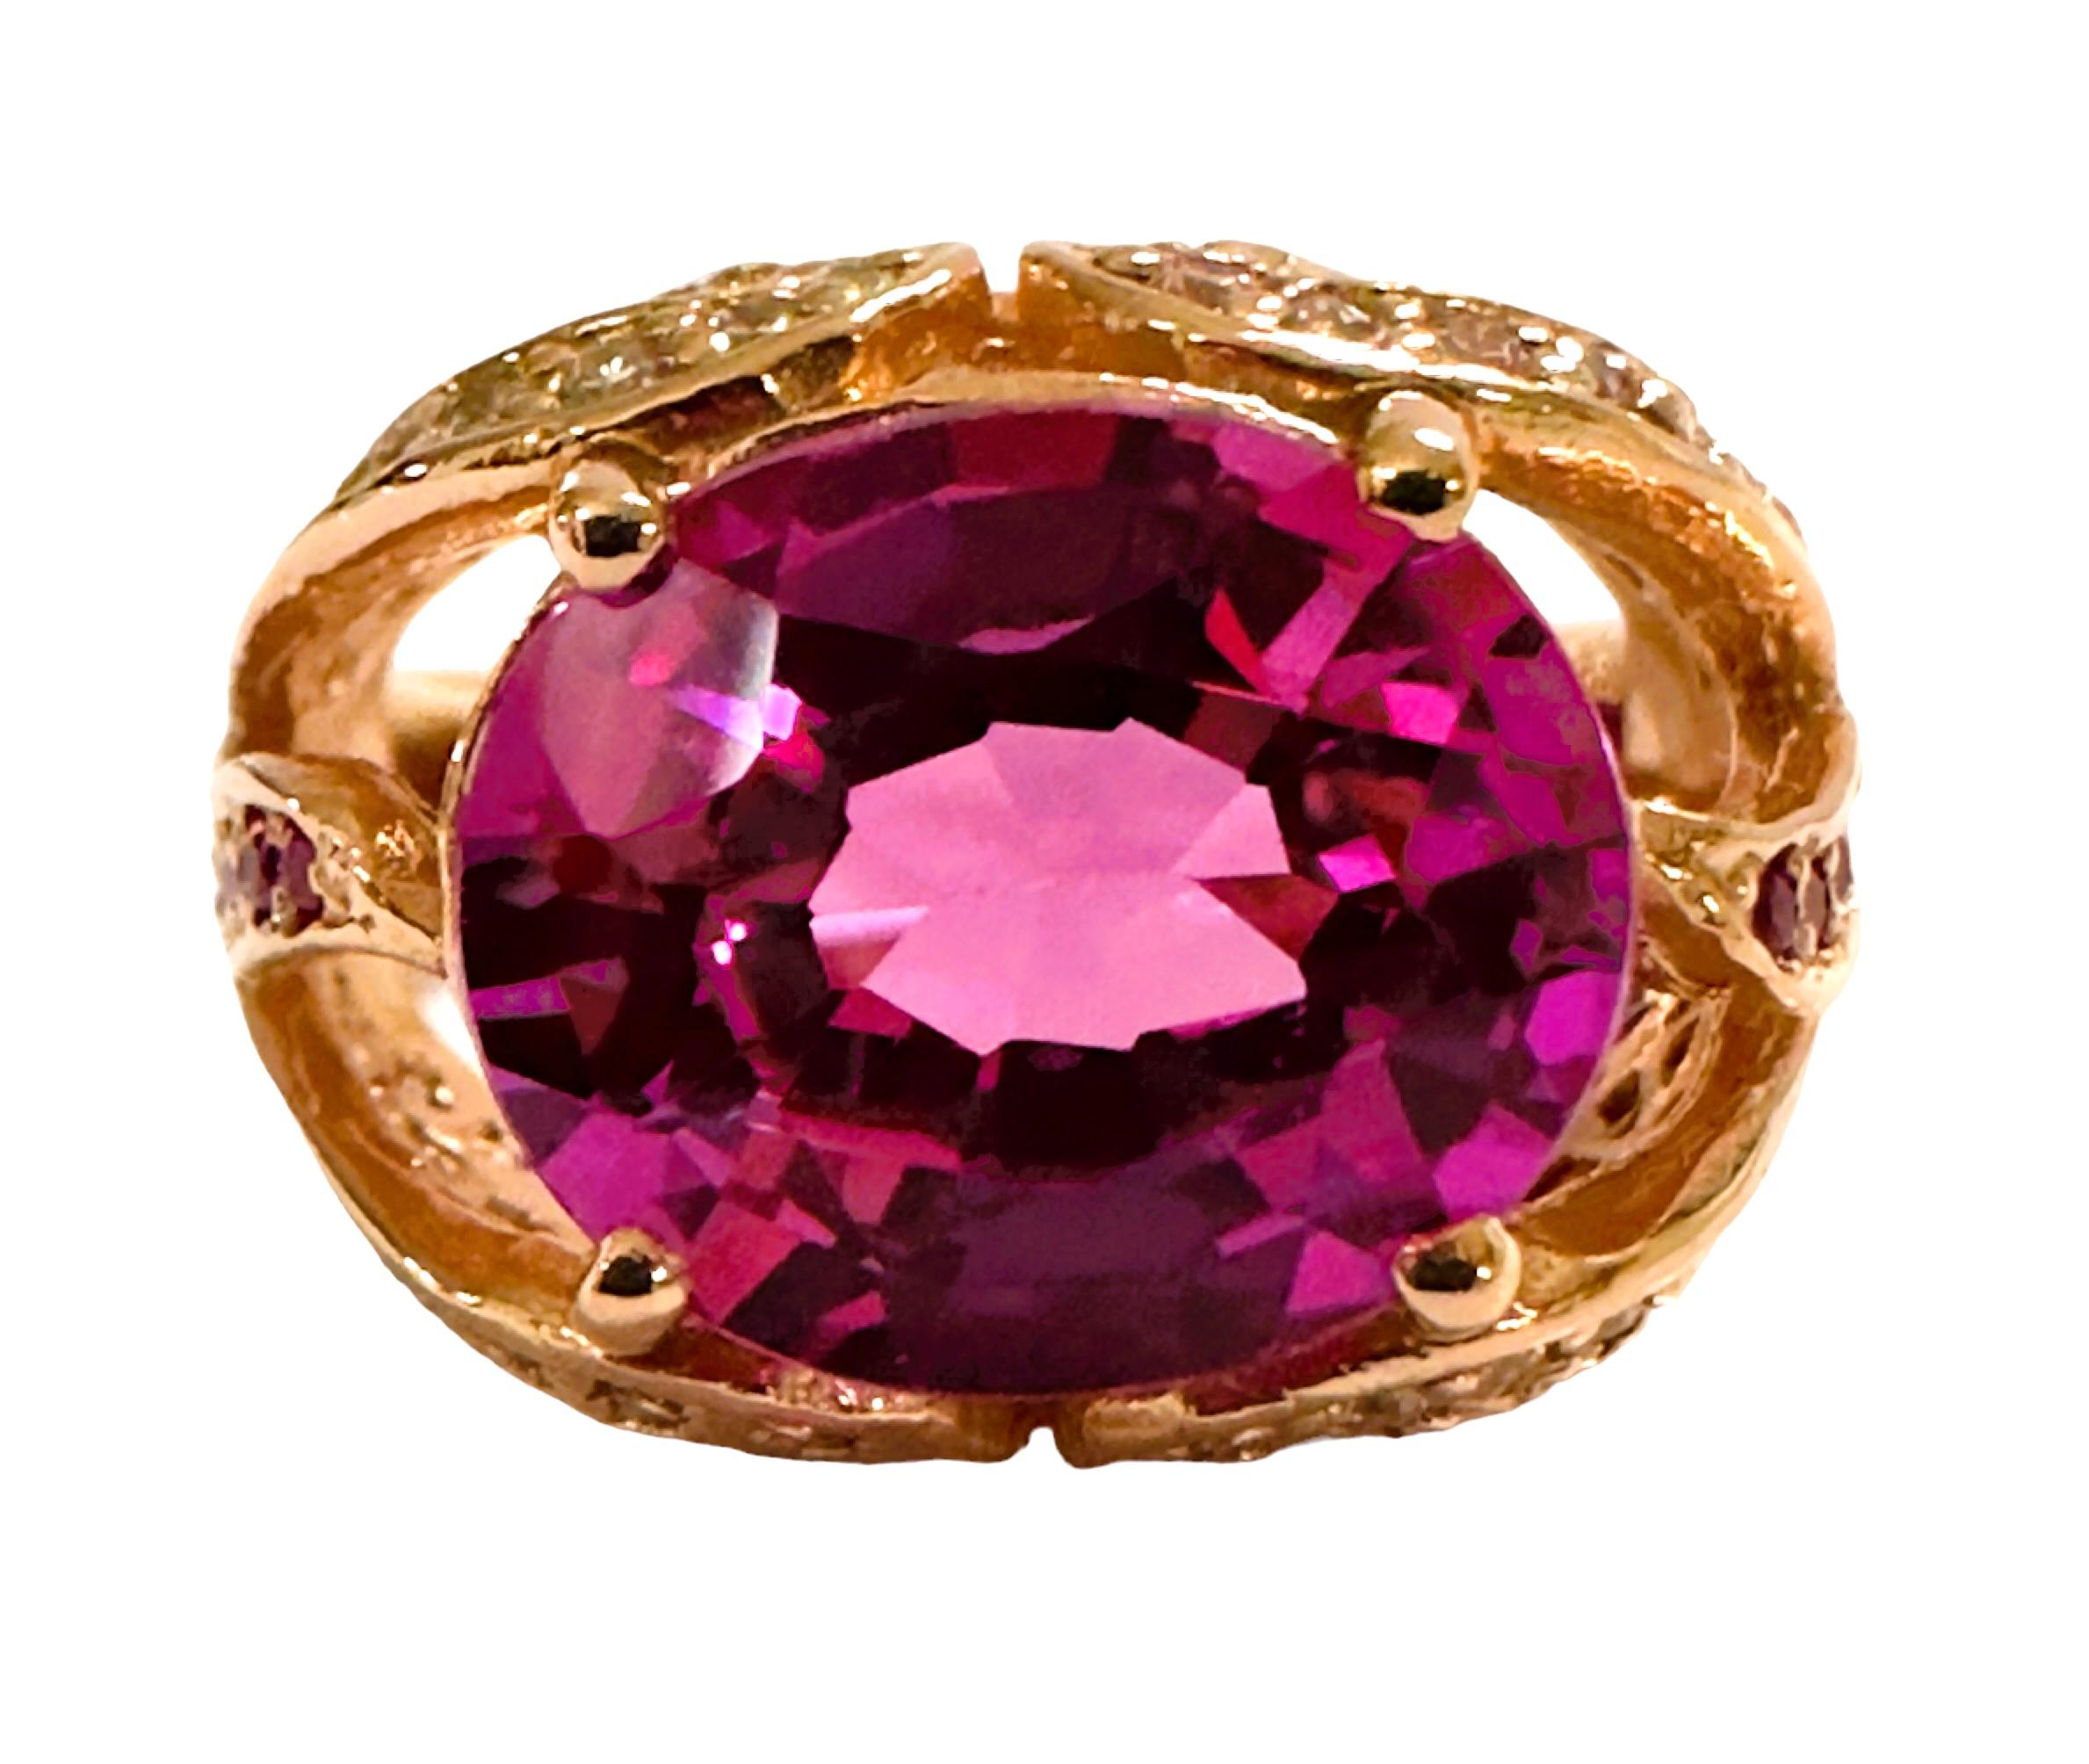 This is just a beautiful gemstone. This beautiful stone has pinks, blues and purples in it.  It's just spectacular.  The ring is a size 6.75.  It was mined in Africa and is just exquisite.   A very high quality stone. It is an oval cut stone and is